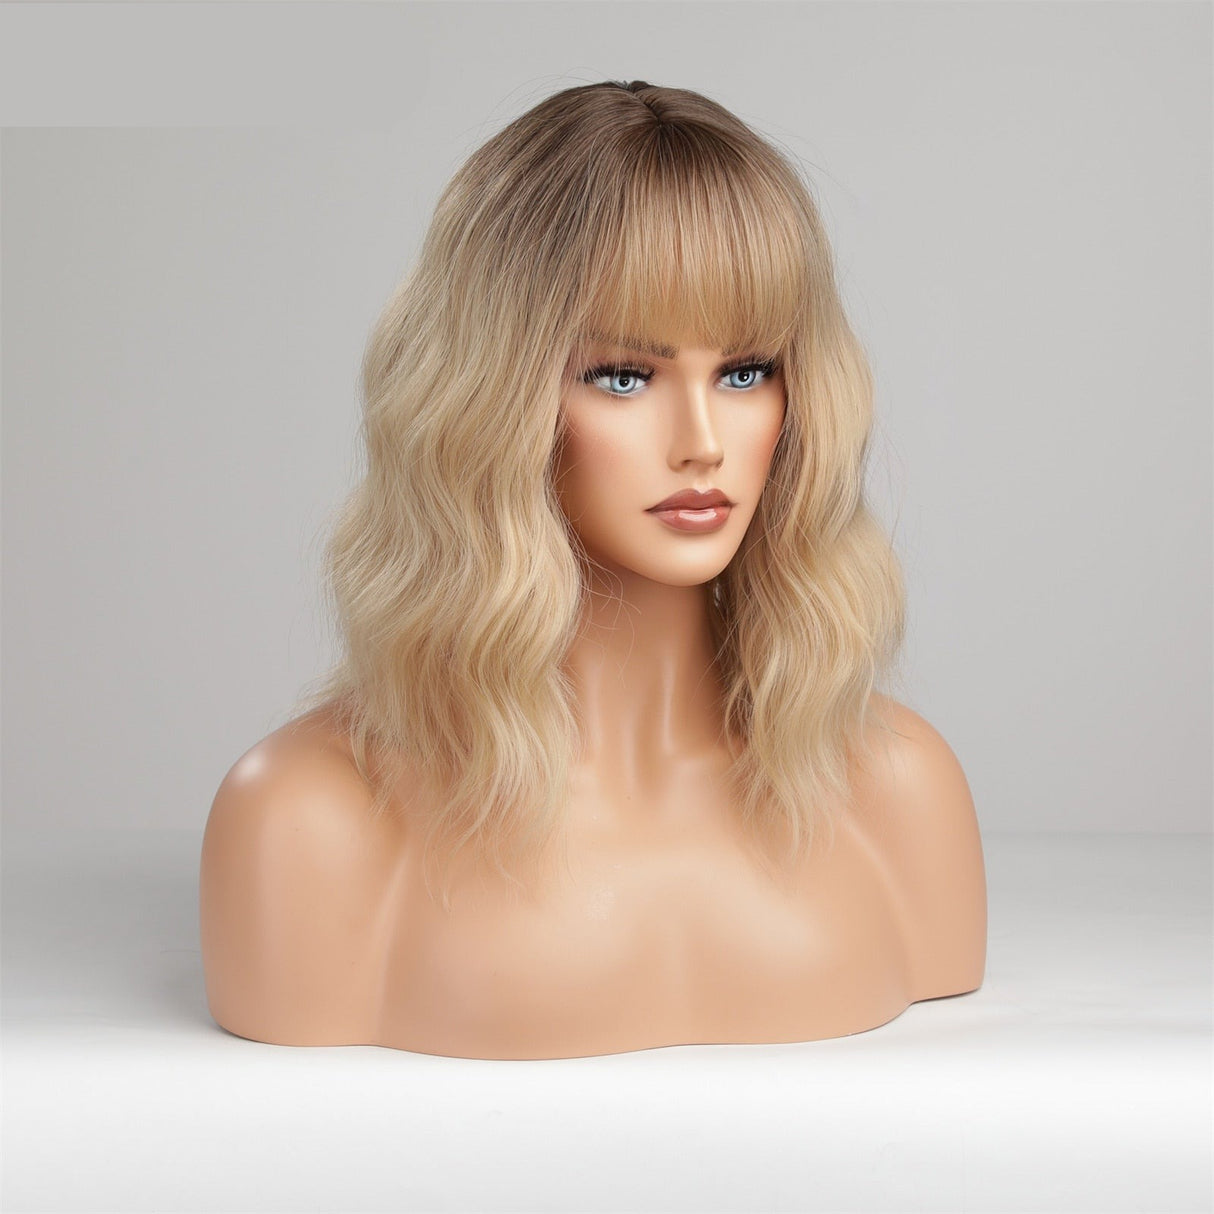 16 Inch Ombre Blonde Loose Curly Hair Wig